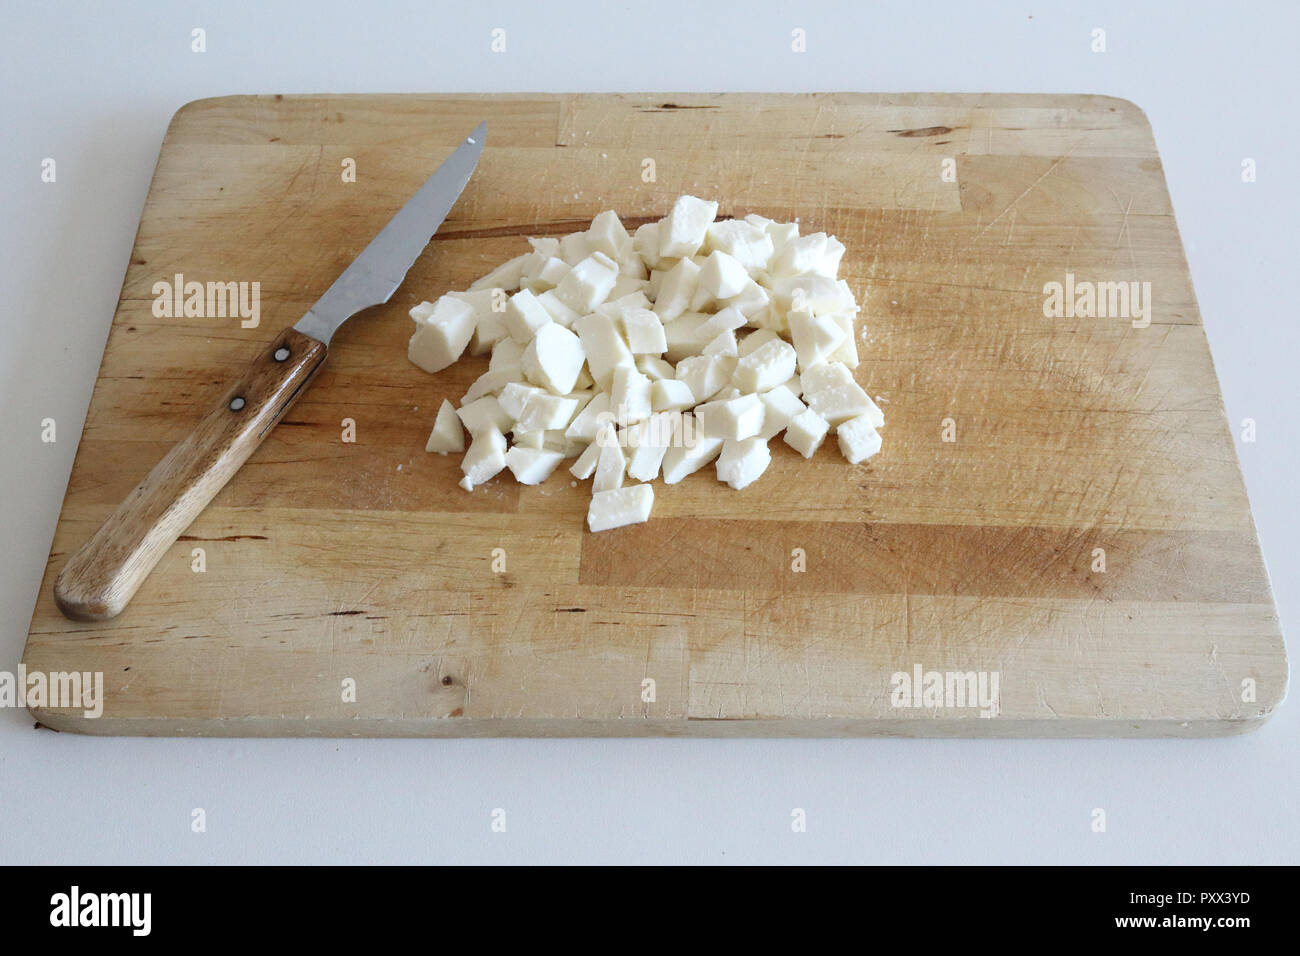 A minced stack of white mozzarella cheese dices on a wooden cutting board with a knife, typical of Italian and Mediterranean cuisine Stock Photo